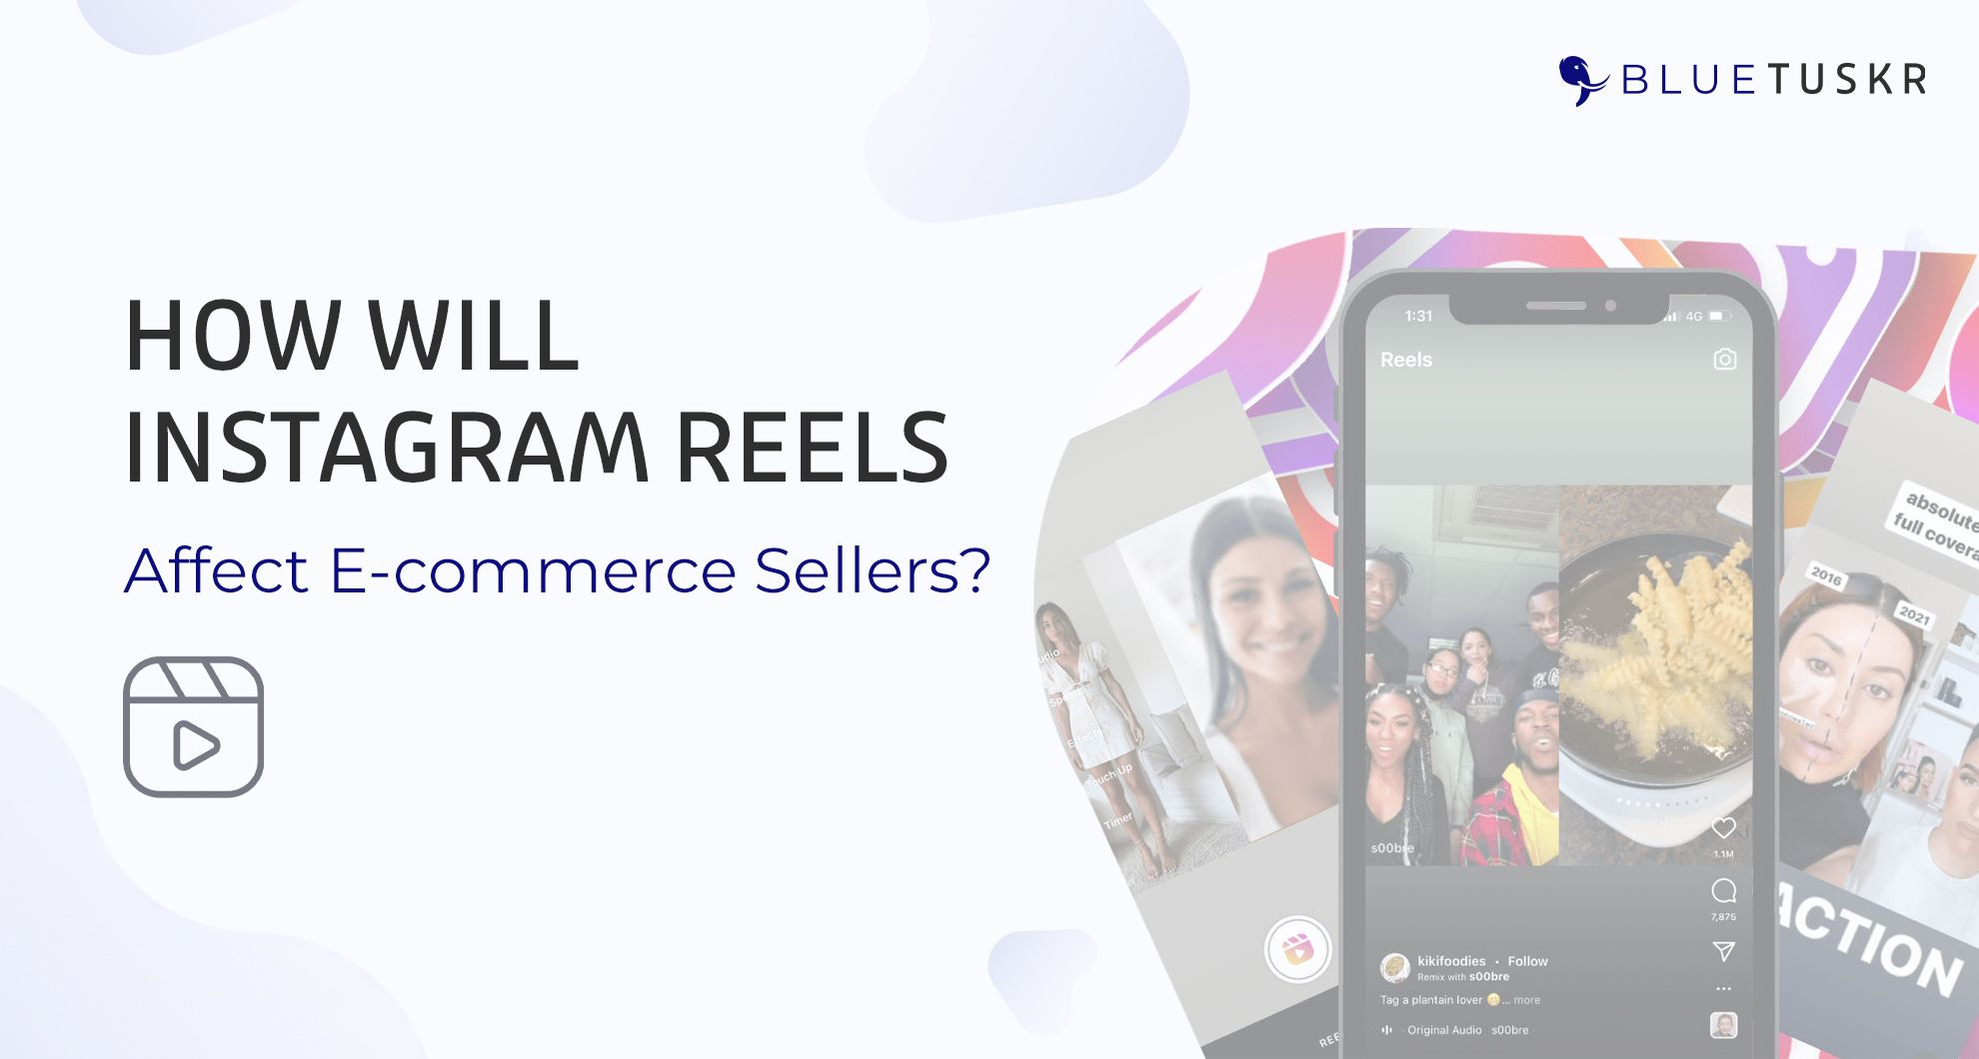 How Will Instagram Reels Affect E-commerce Sellers?